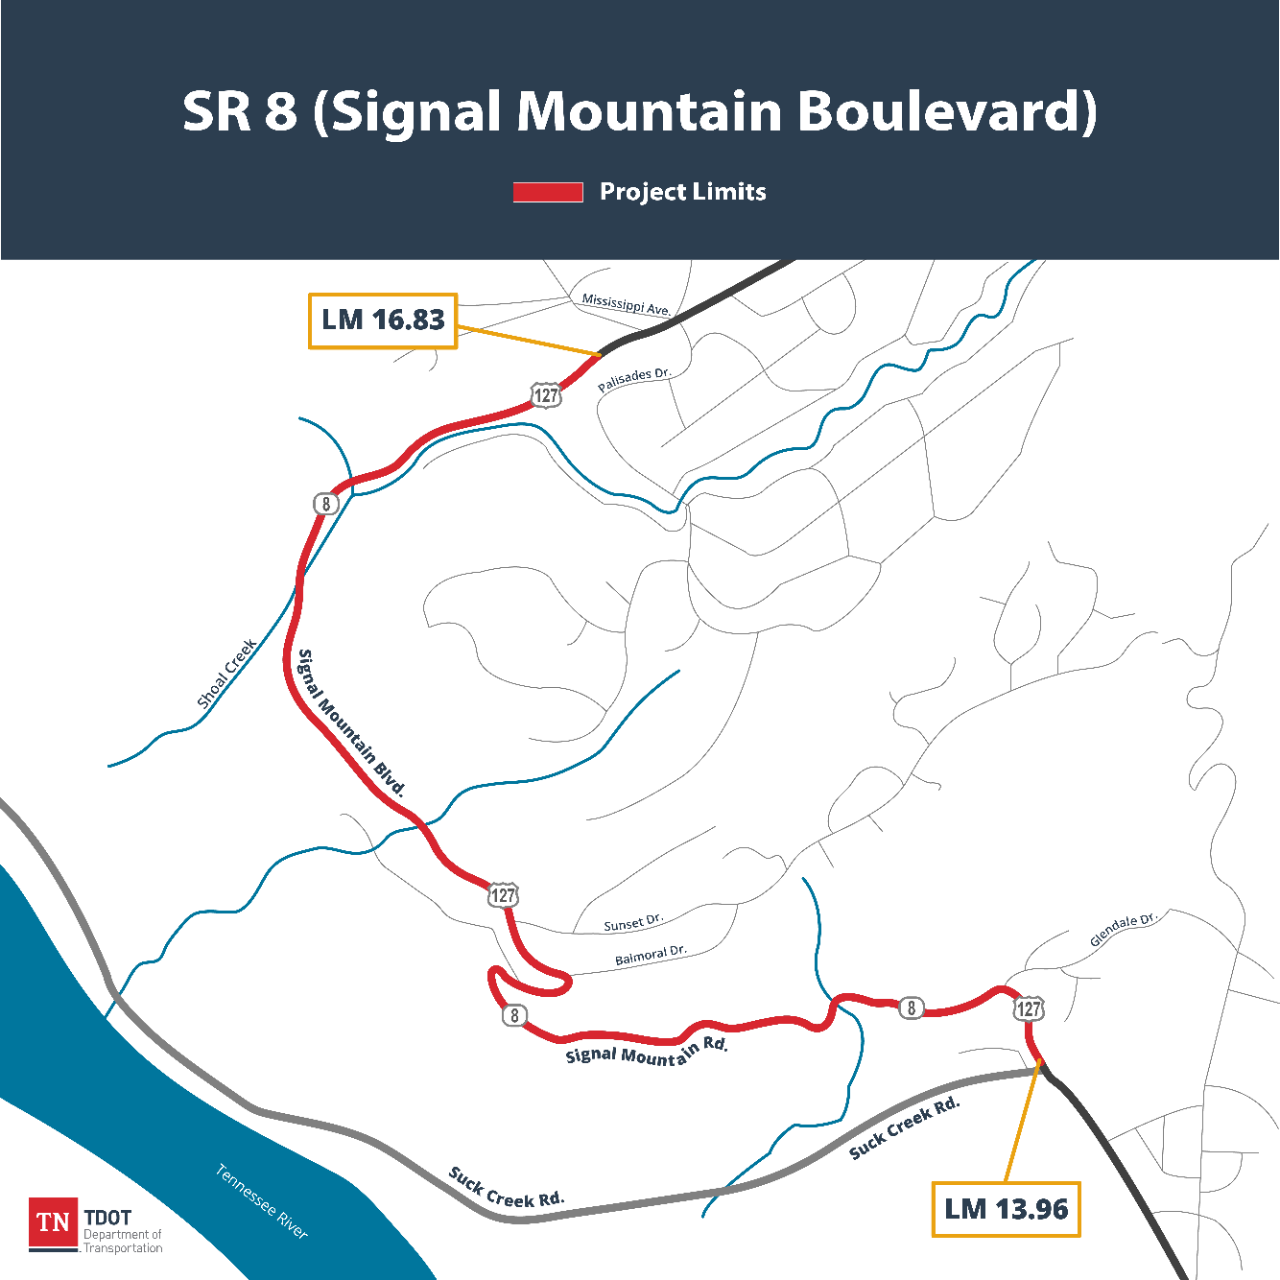 SR 8 (Signal Mountain Boulevard) project location map.